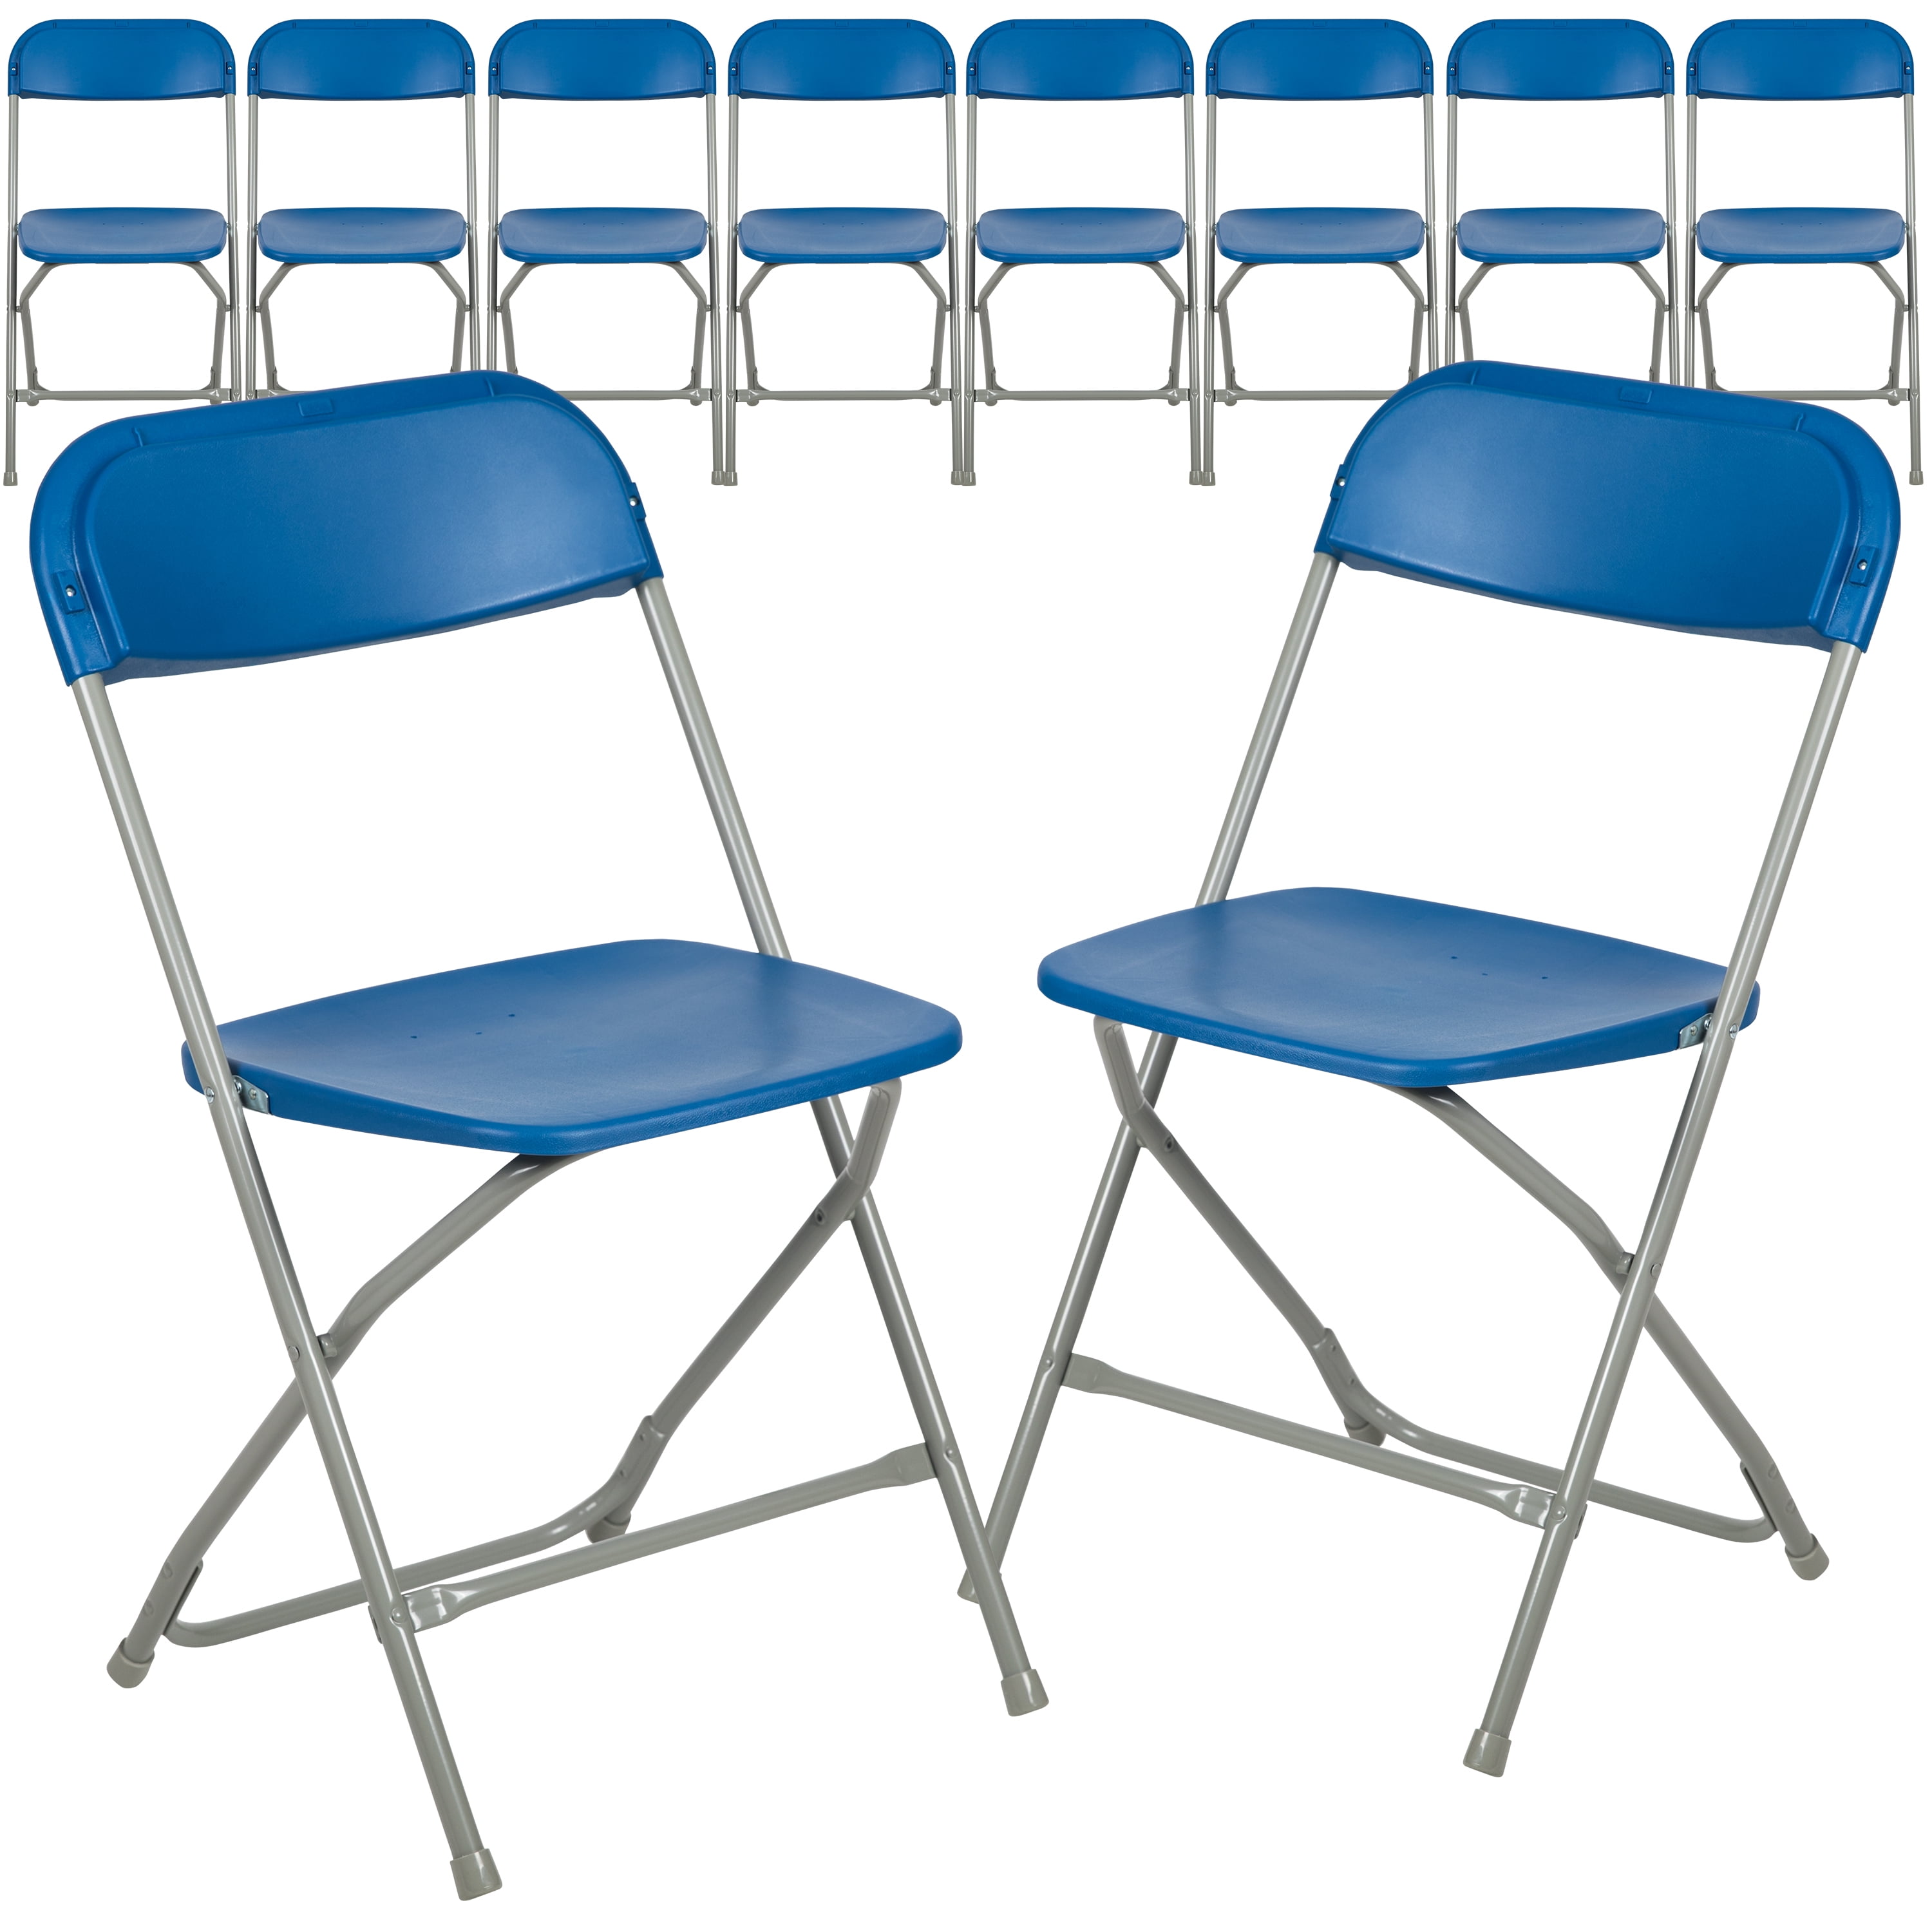 Folding Chair 2 Pack Premium Beige Plastic Hercules Series 650 lb Capacity Designed for Indoor and Outdoor Use